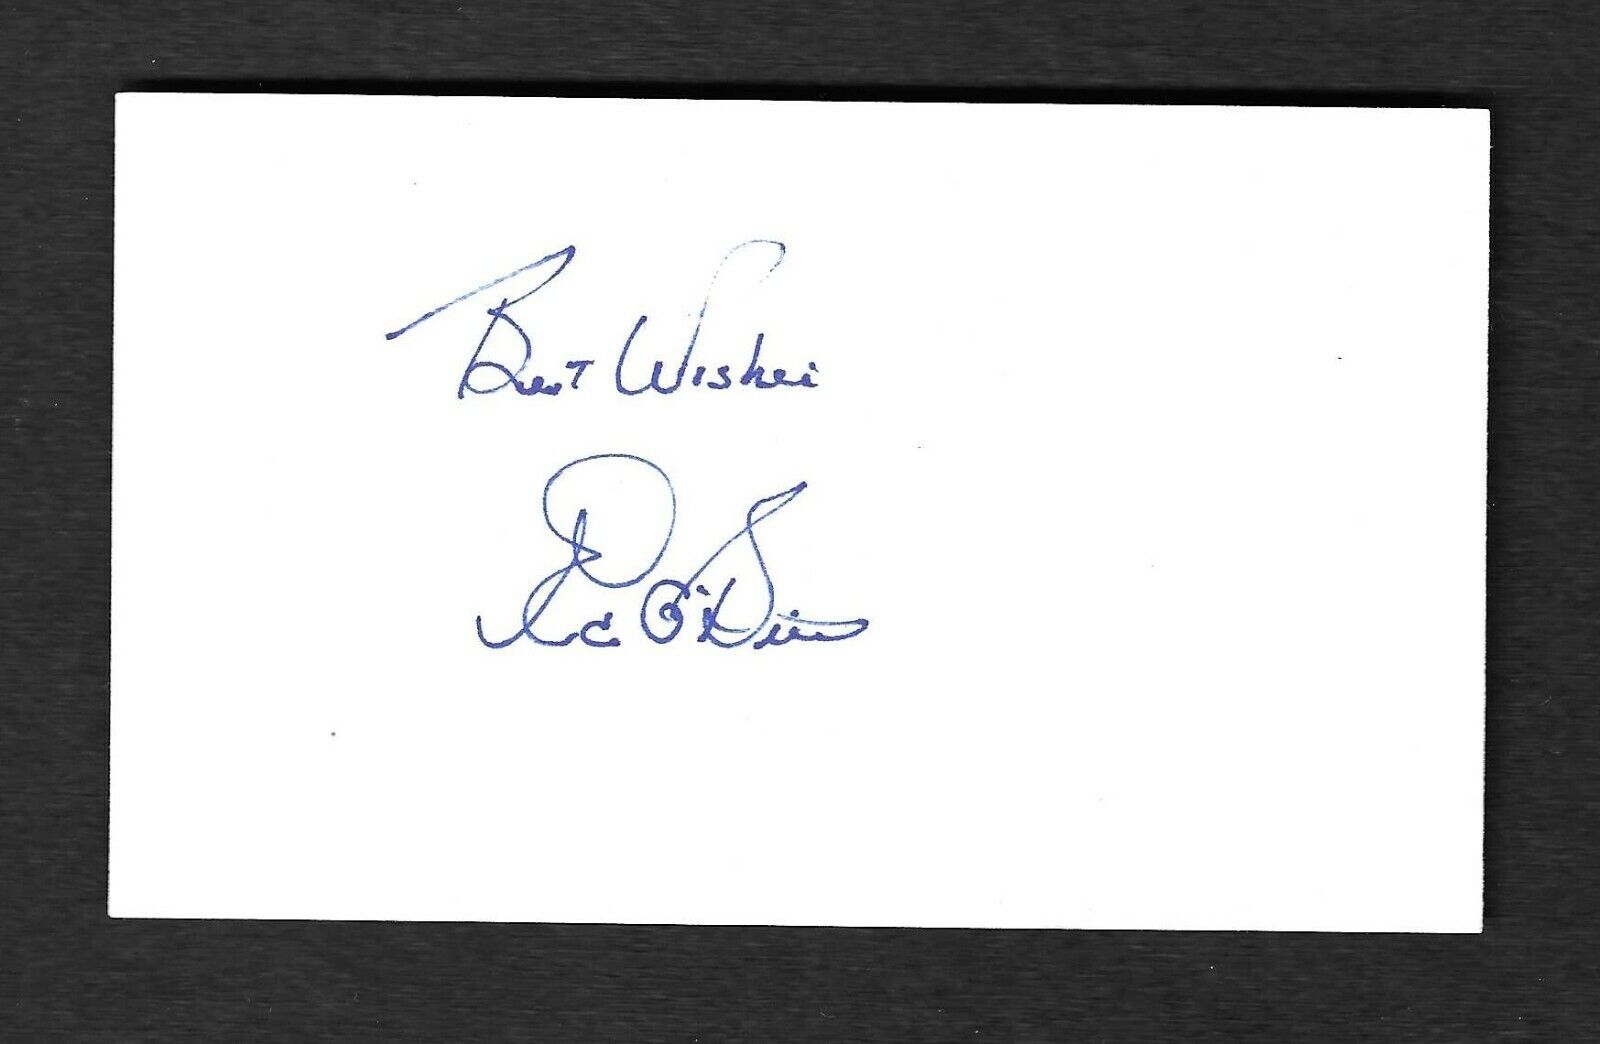 Ed O'Brien 1955-58 Pittsburgh Pirates Signed Autographed 3X5 Index Card d.2014